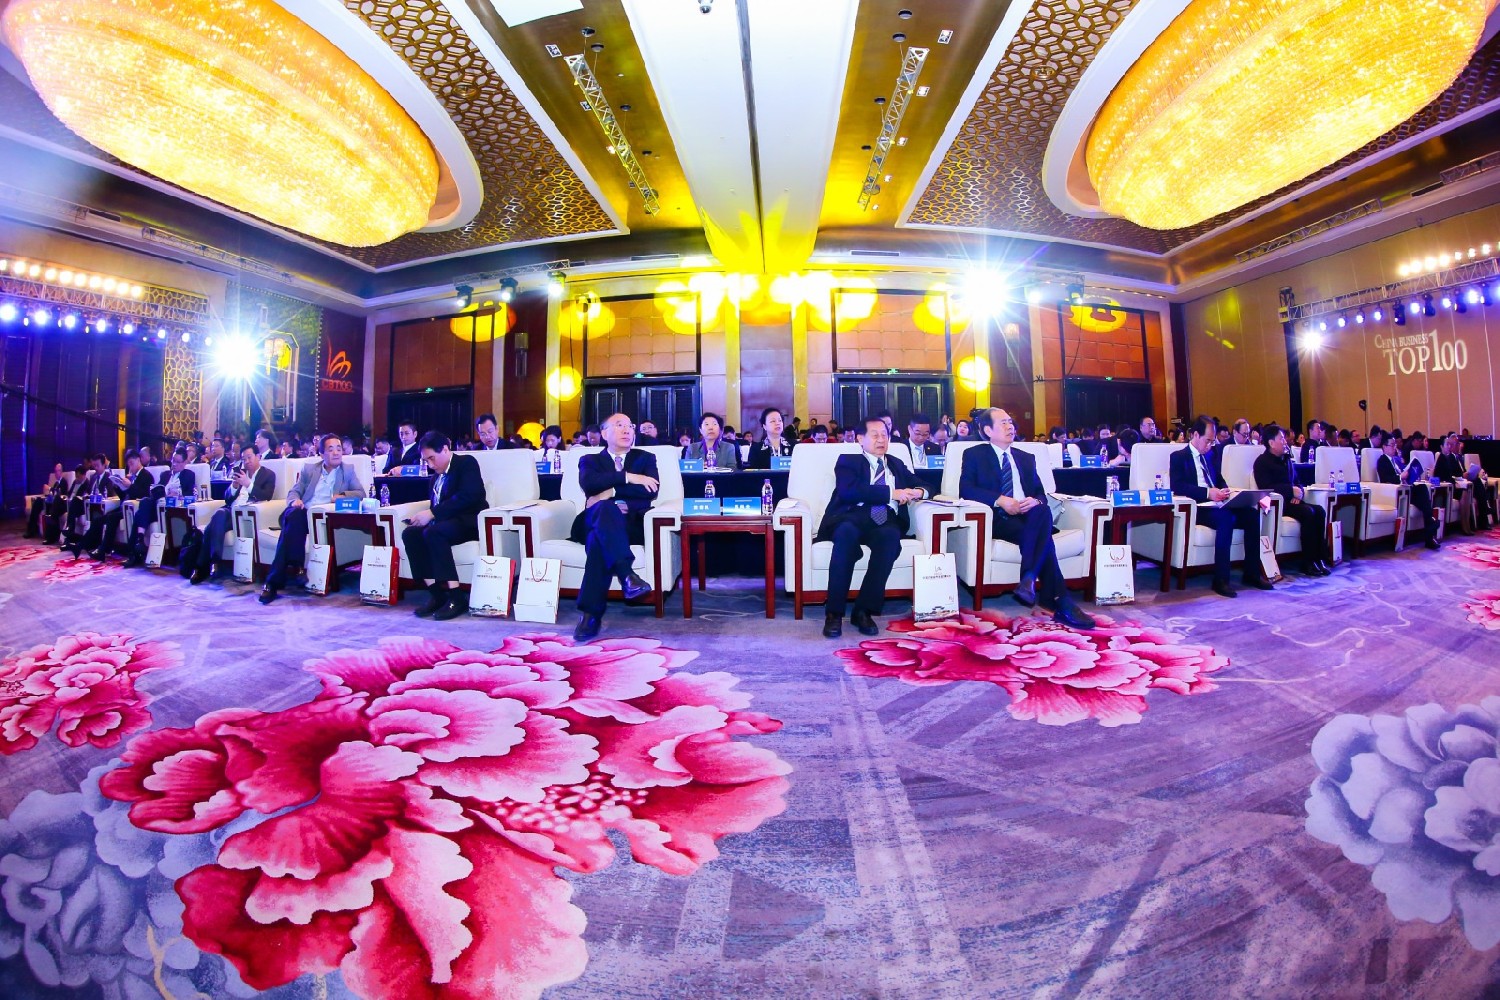 The 18th China Business Top 500 Forum was grandly held in Beijing